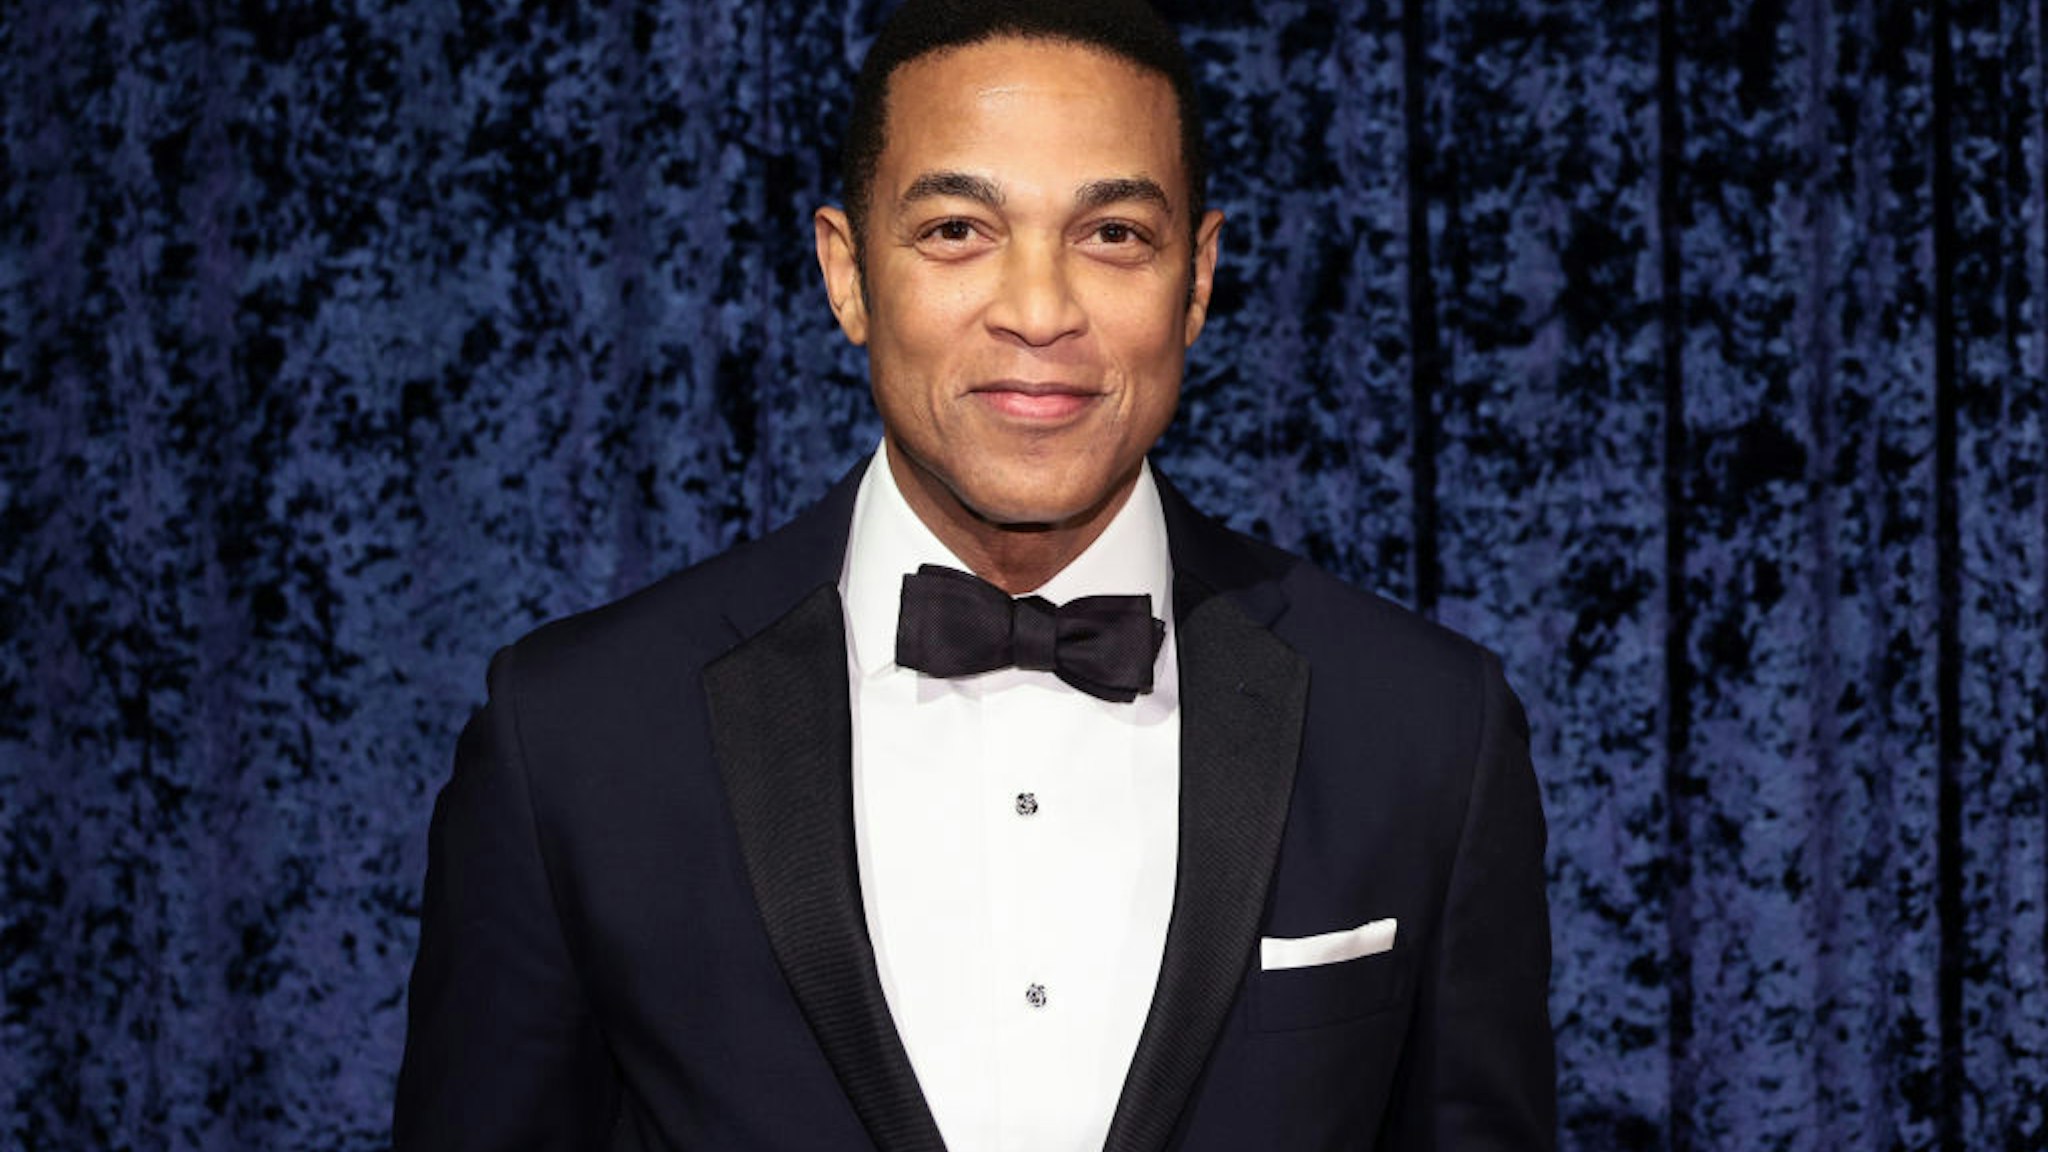 NEW YORK, NEW YORK - APRIL 06: Don Lemon attends the Clive Davis 90th Birthday Celebration at Casa Cipriani on April 06, 2022 in New York City. (Photo by Jamie McCarthy/Getty Images)